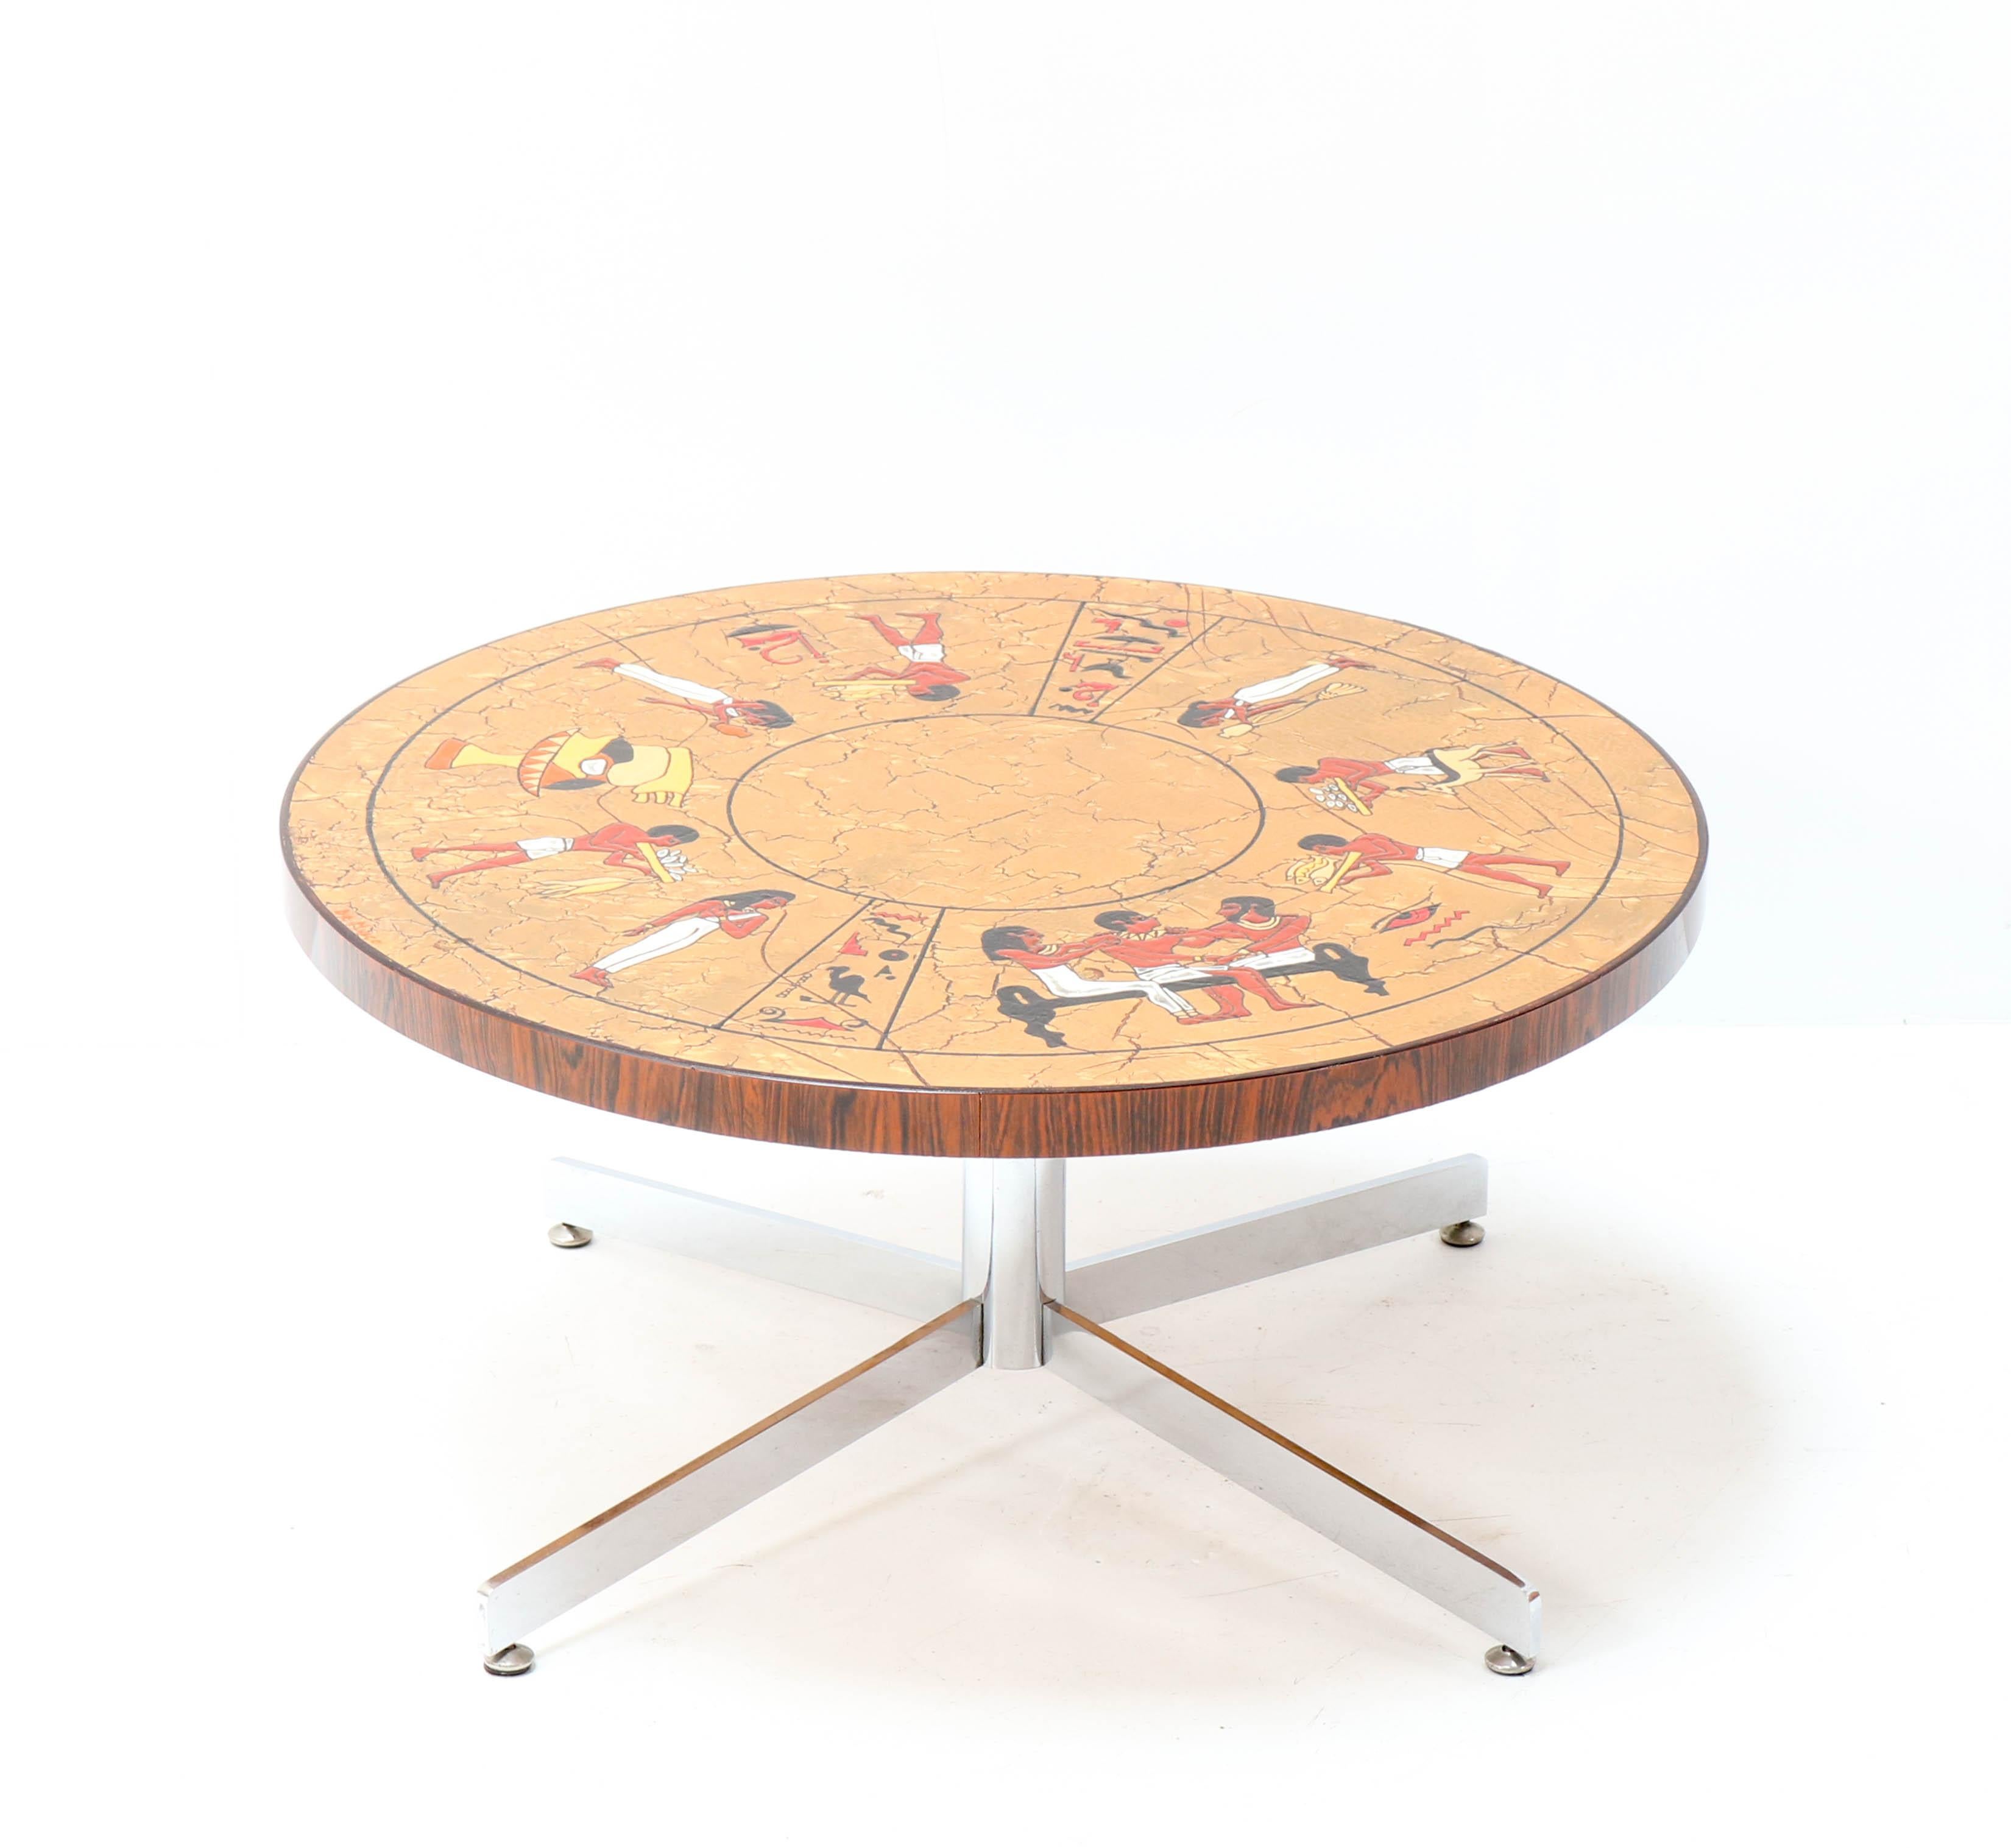 Belgium Mid-Century Modern Coffee Table with Tiles by Denisco, 1970s In Good Condition For Sale In Amsterdam, NL